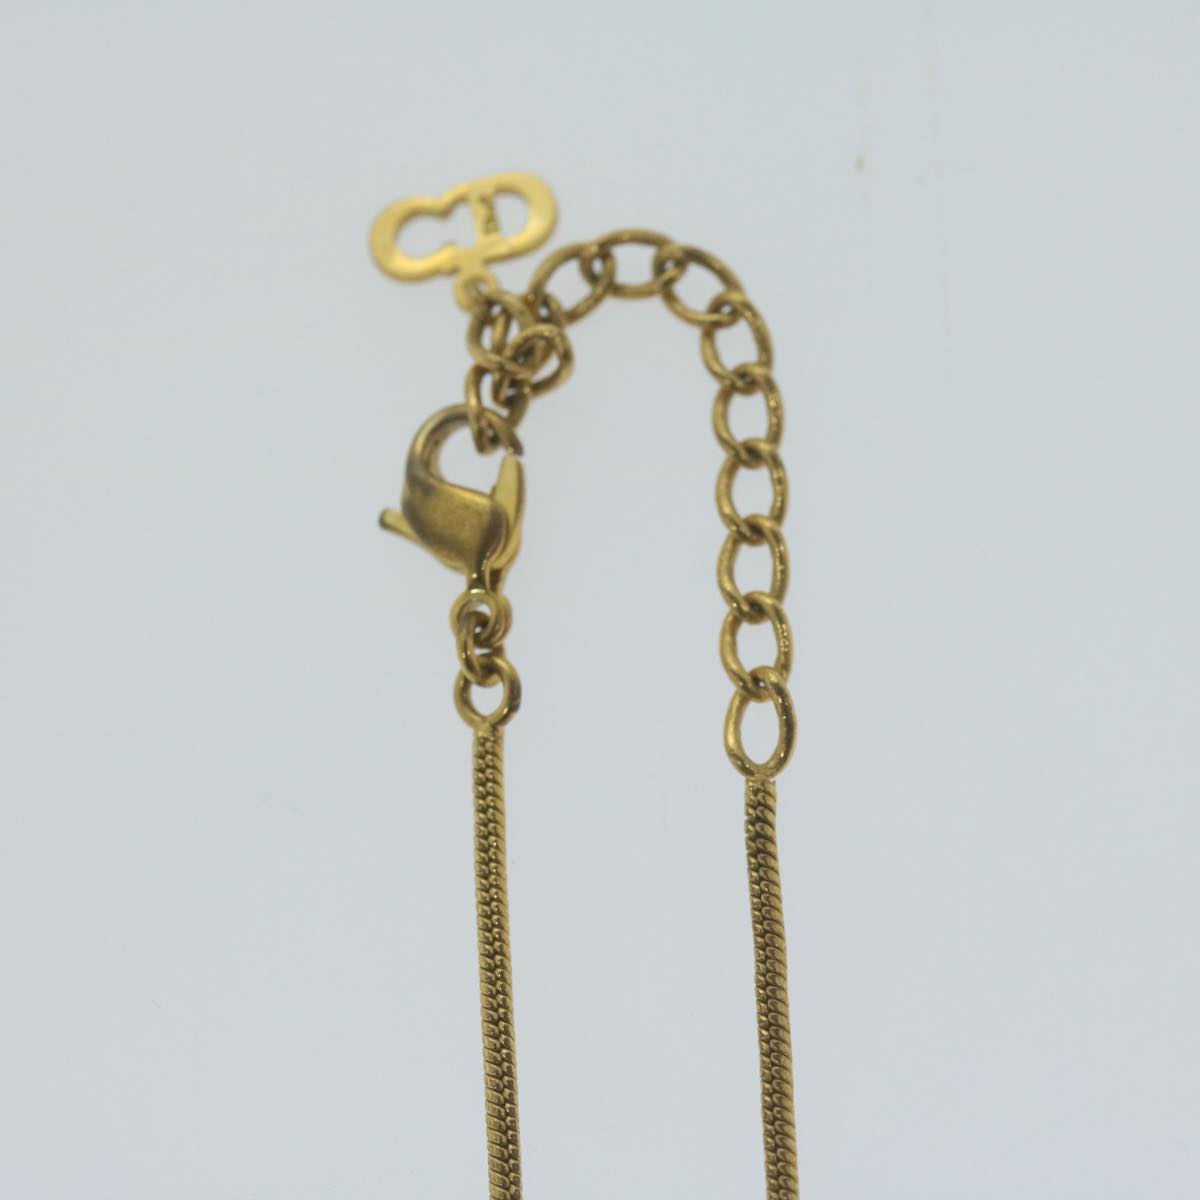 Christian Dior Necklace metal Gold Auth am5728